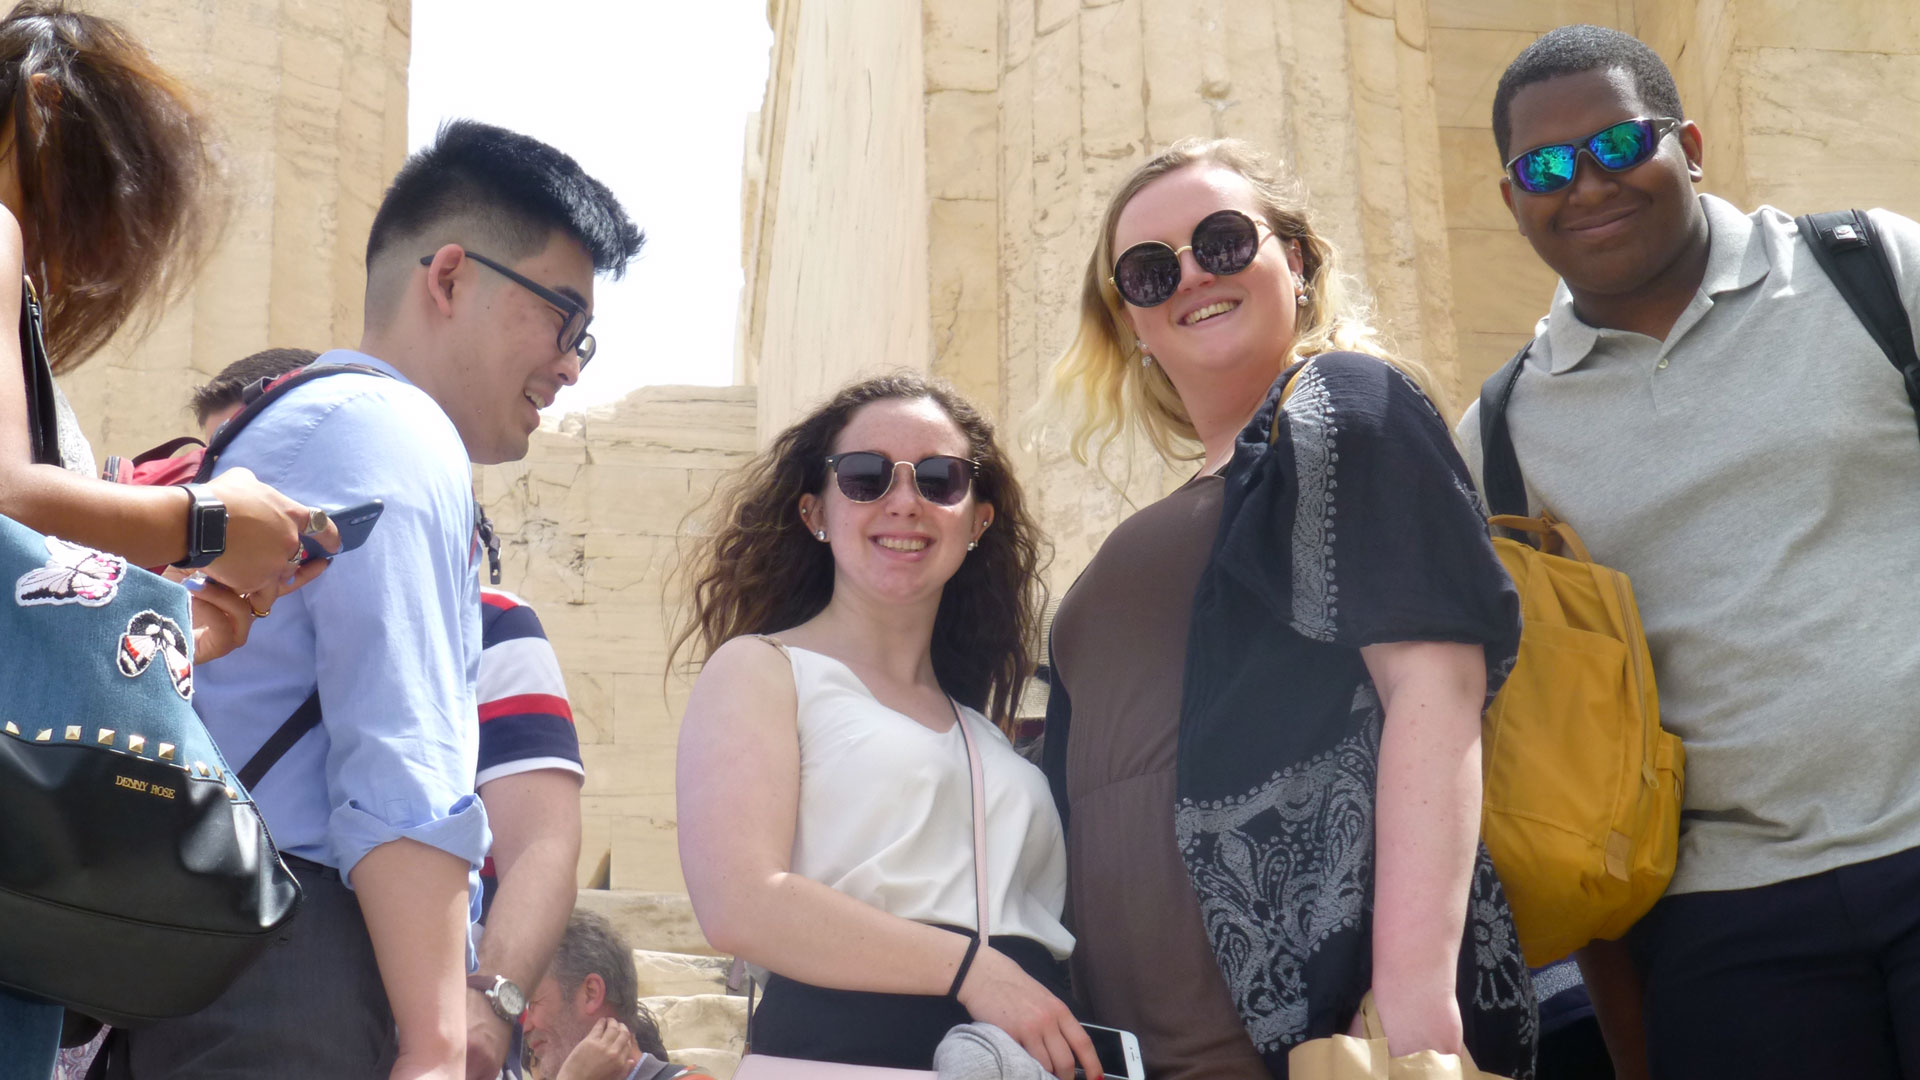 Students exploring the Acropolis in Athens, Greece.